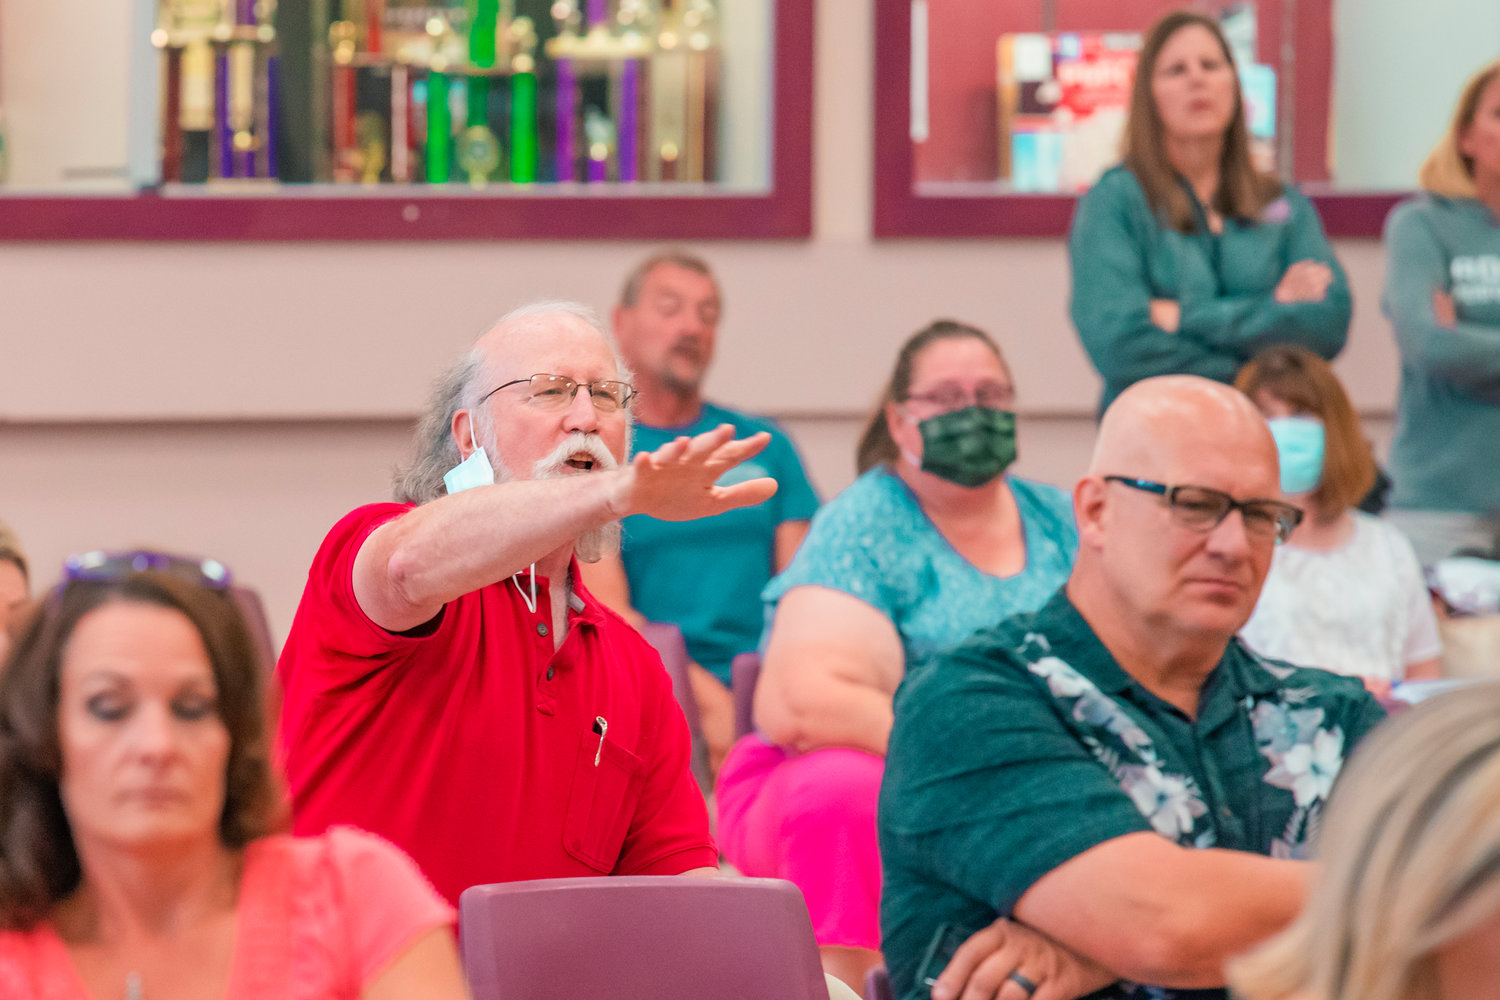 Community members speak out against Board Policy 3211 during a Chehalis School Board meeting Tuesday in Chehalis.